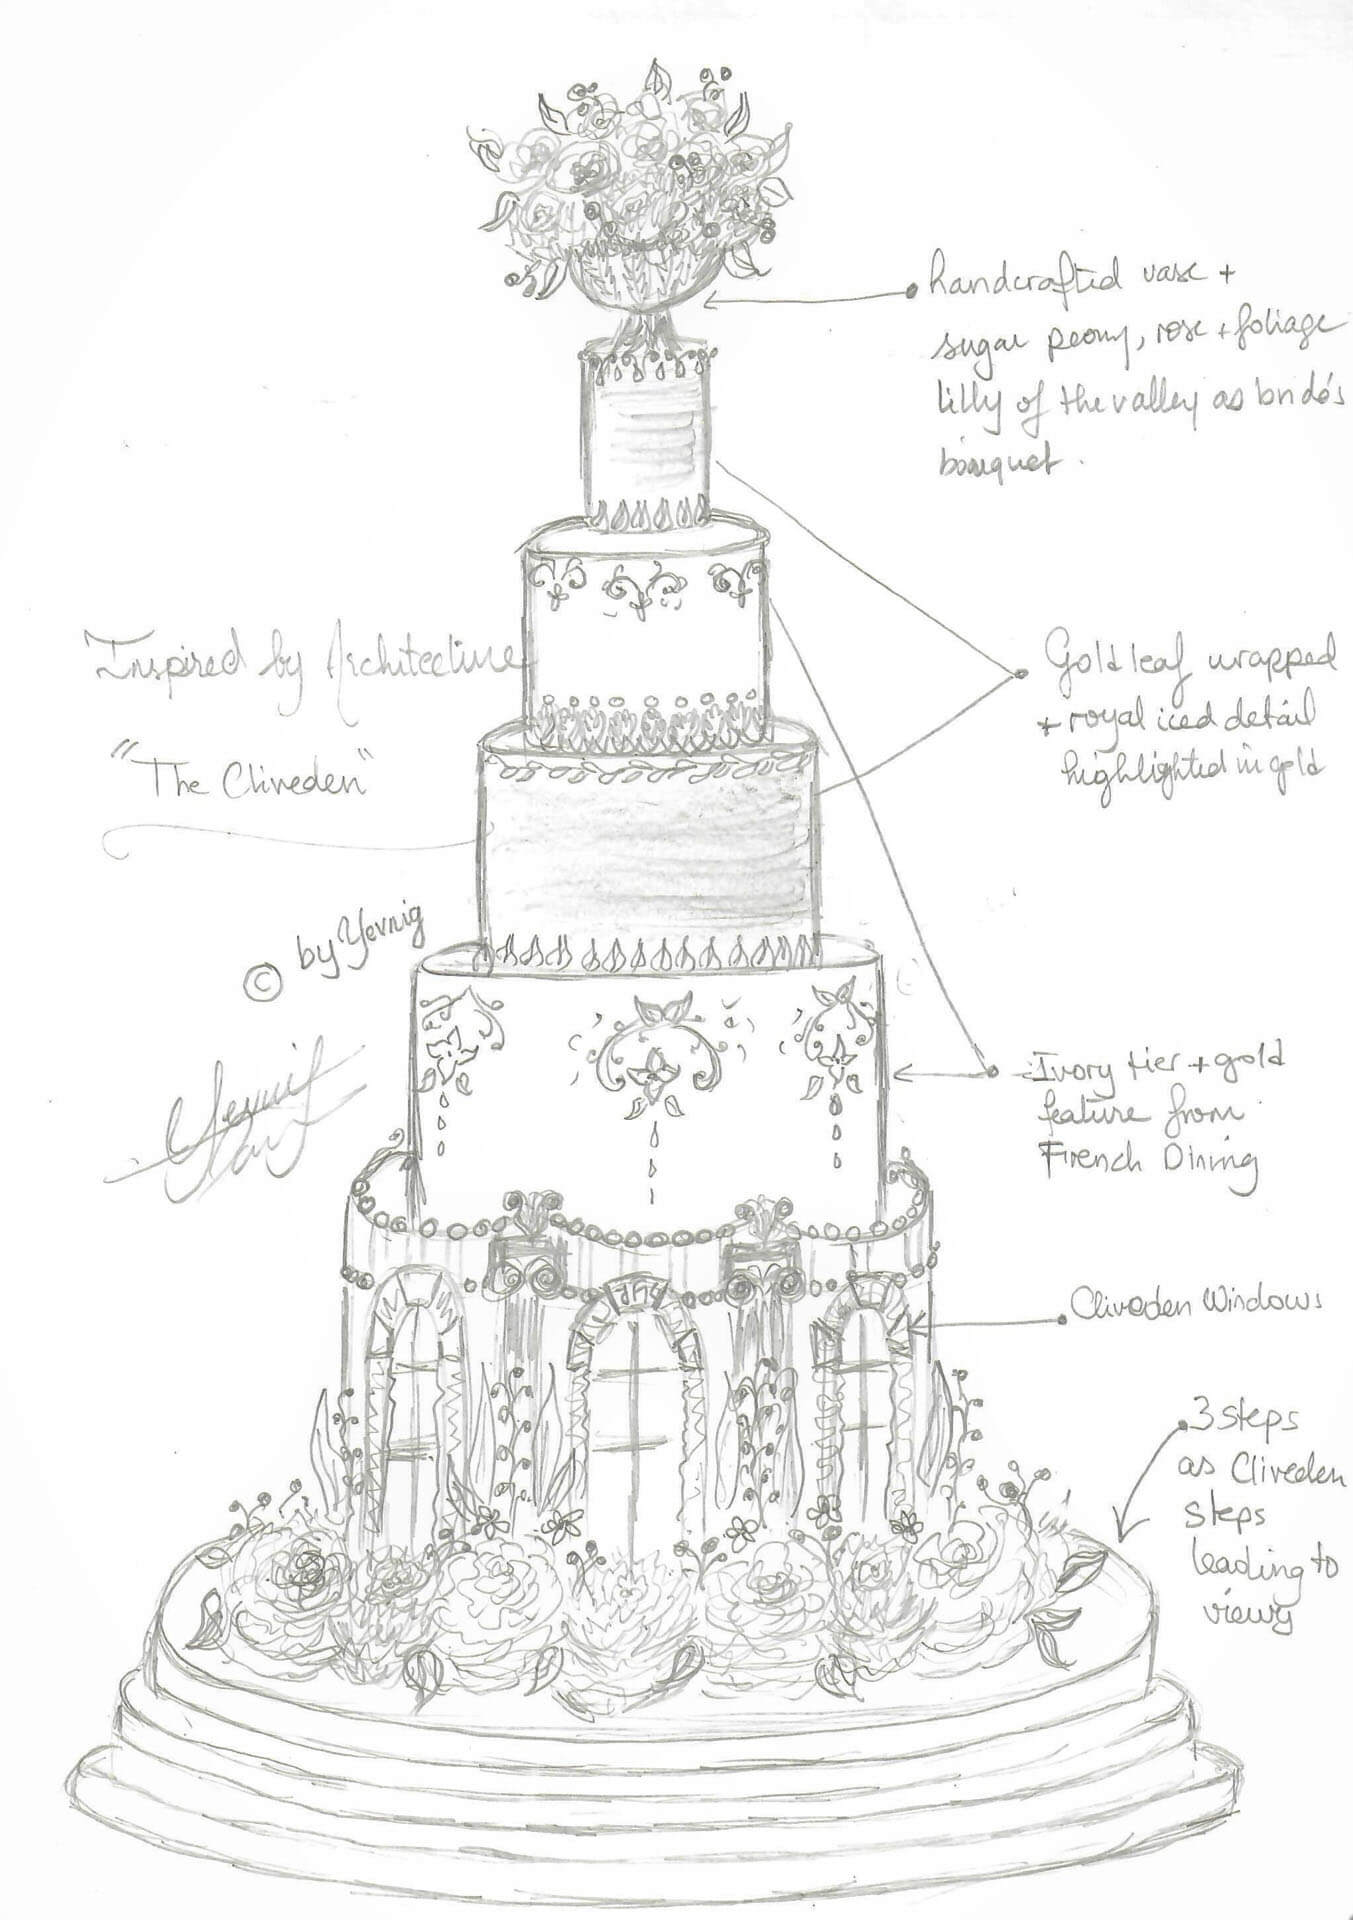 Your By Yevnig experience Luxury Wedding and occasion Cakes The Cliveden Sketch